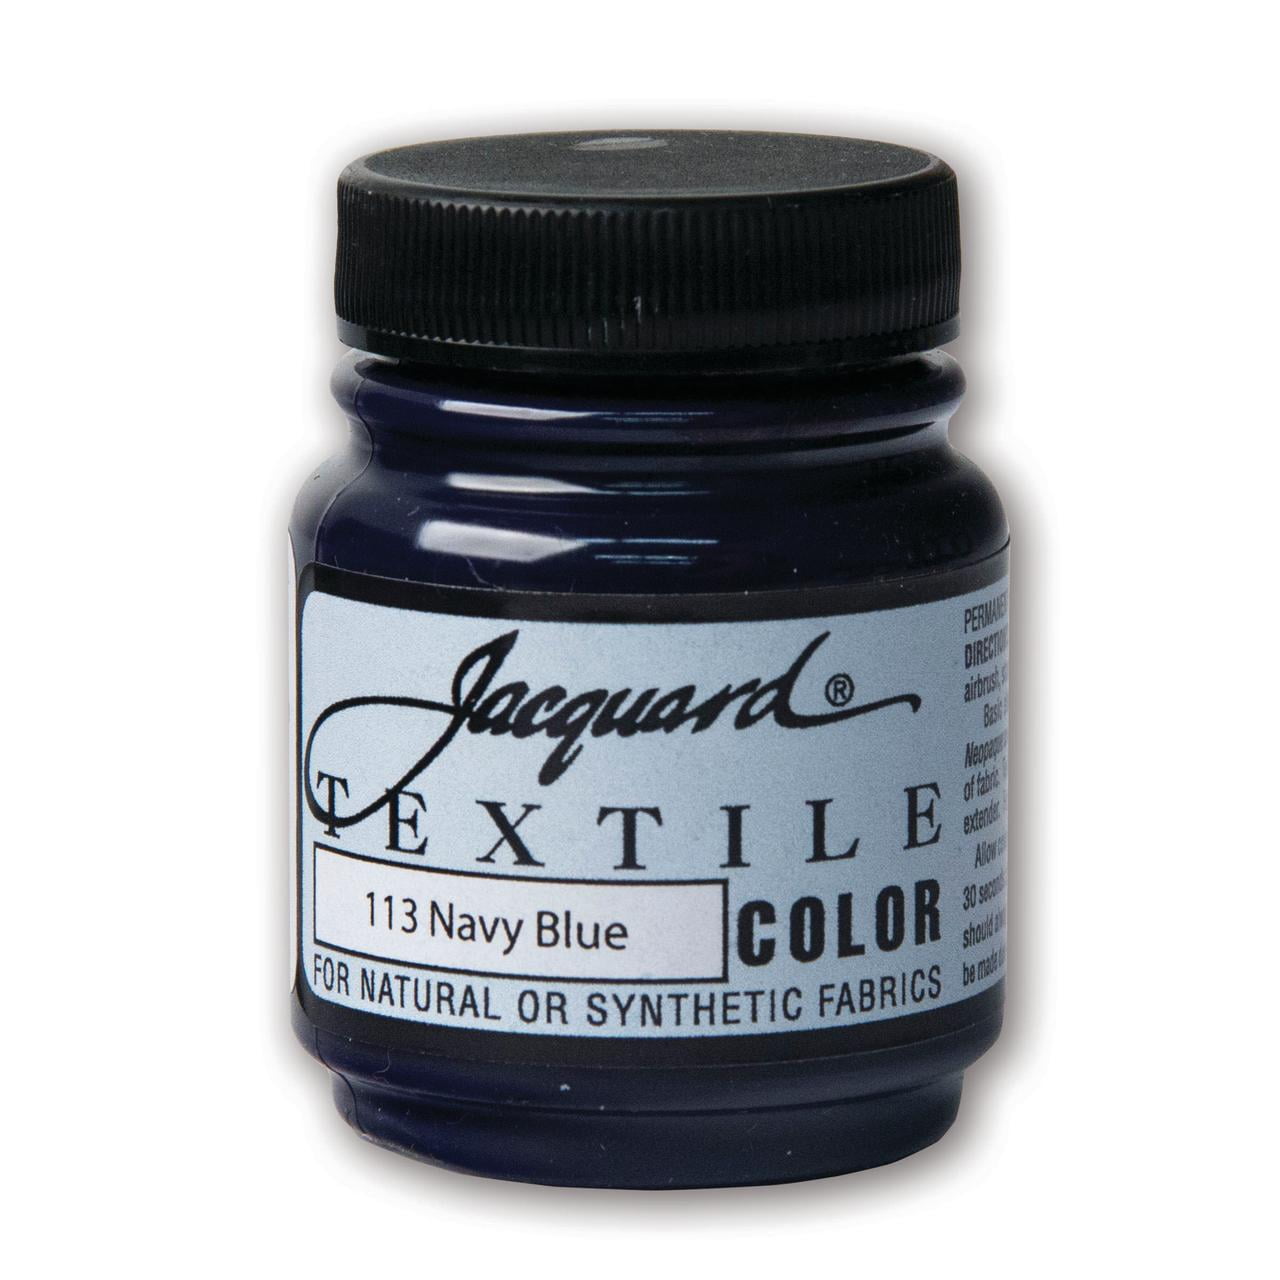 Jacquard Fabric Paint for Clothes - 8 Oz Textile Color - Navy Blue - Leaves  Fabric Soft - Permanent and Colorfast - Professional Quality Paints Made